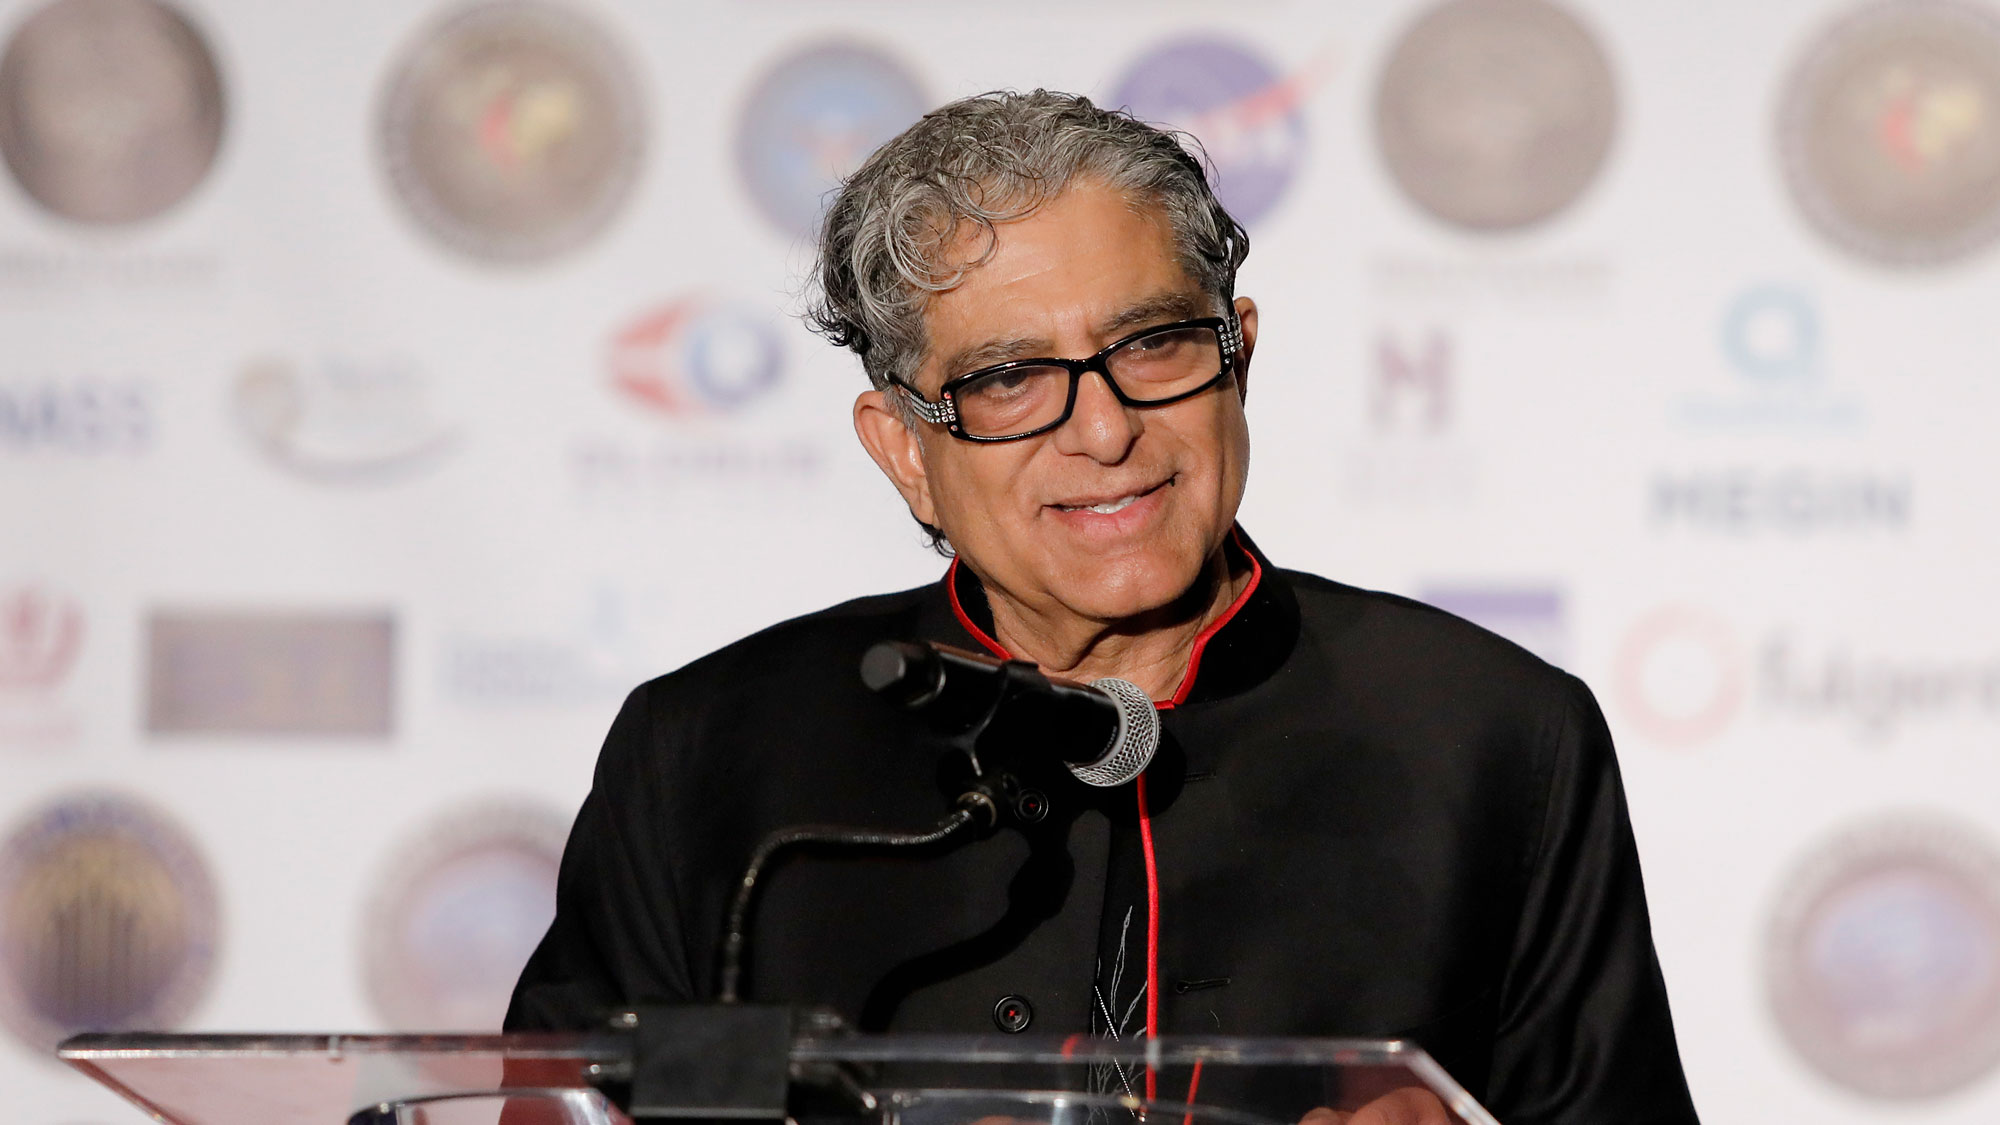 Deepak Chopra receives the Humanitarian Award at Brain Mapping Foundation's "Gathering for Cure" gala on March 16, 2019 in Los Angeles, California.